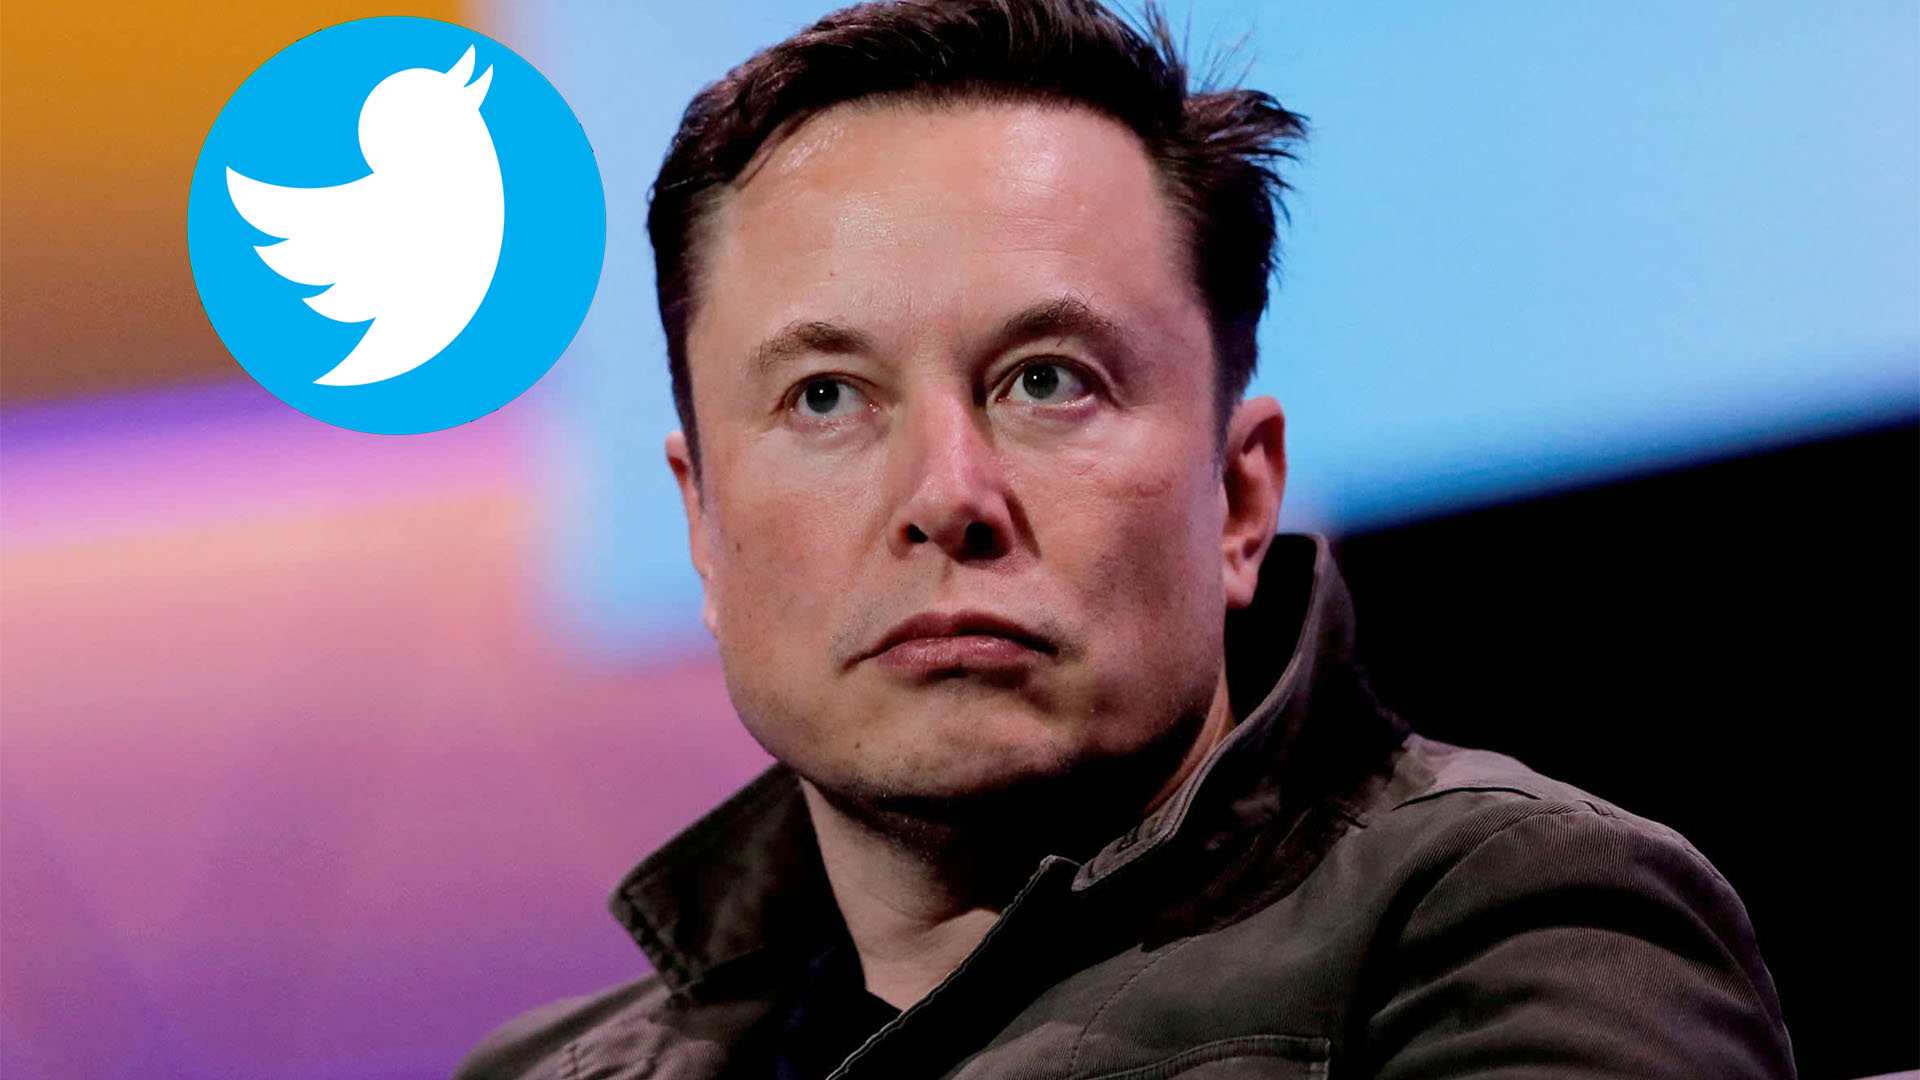 Elon Musk will resign as Twitter CEO once “foolish enough” replacement is found